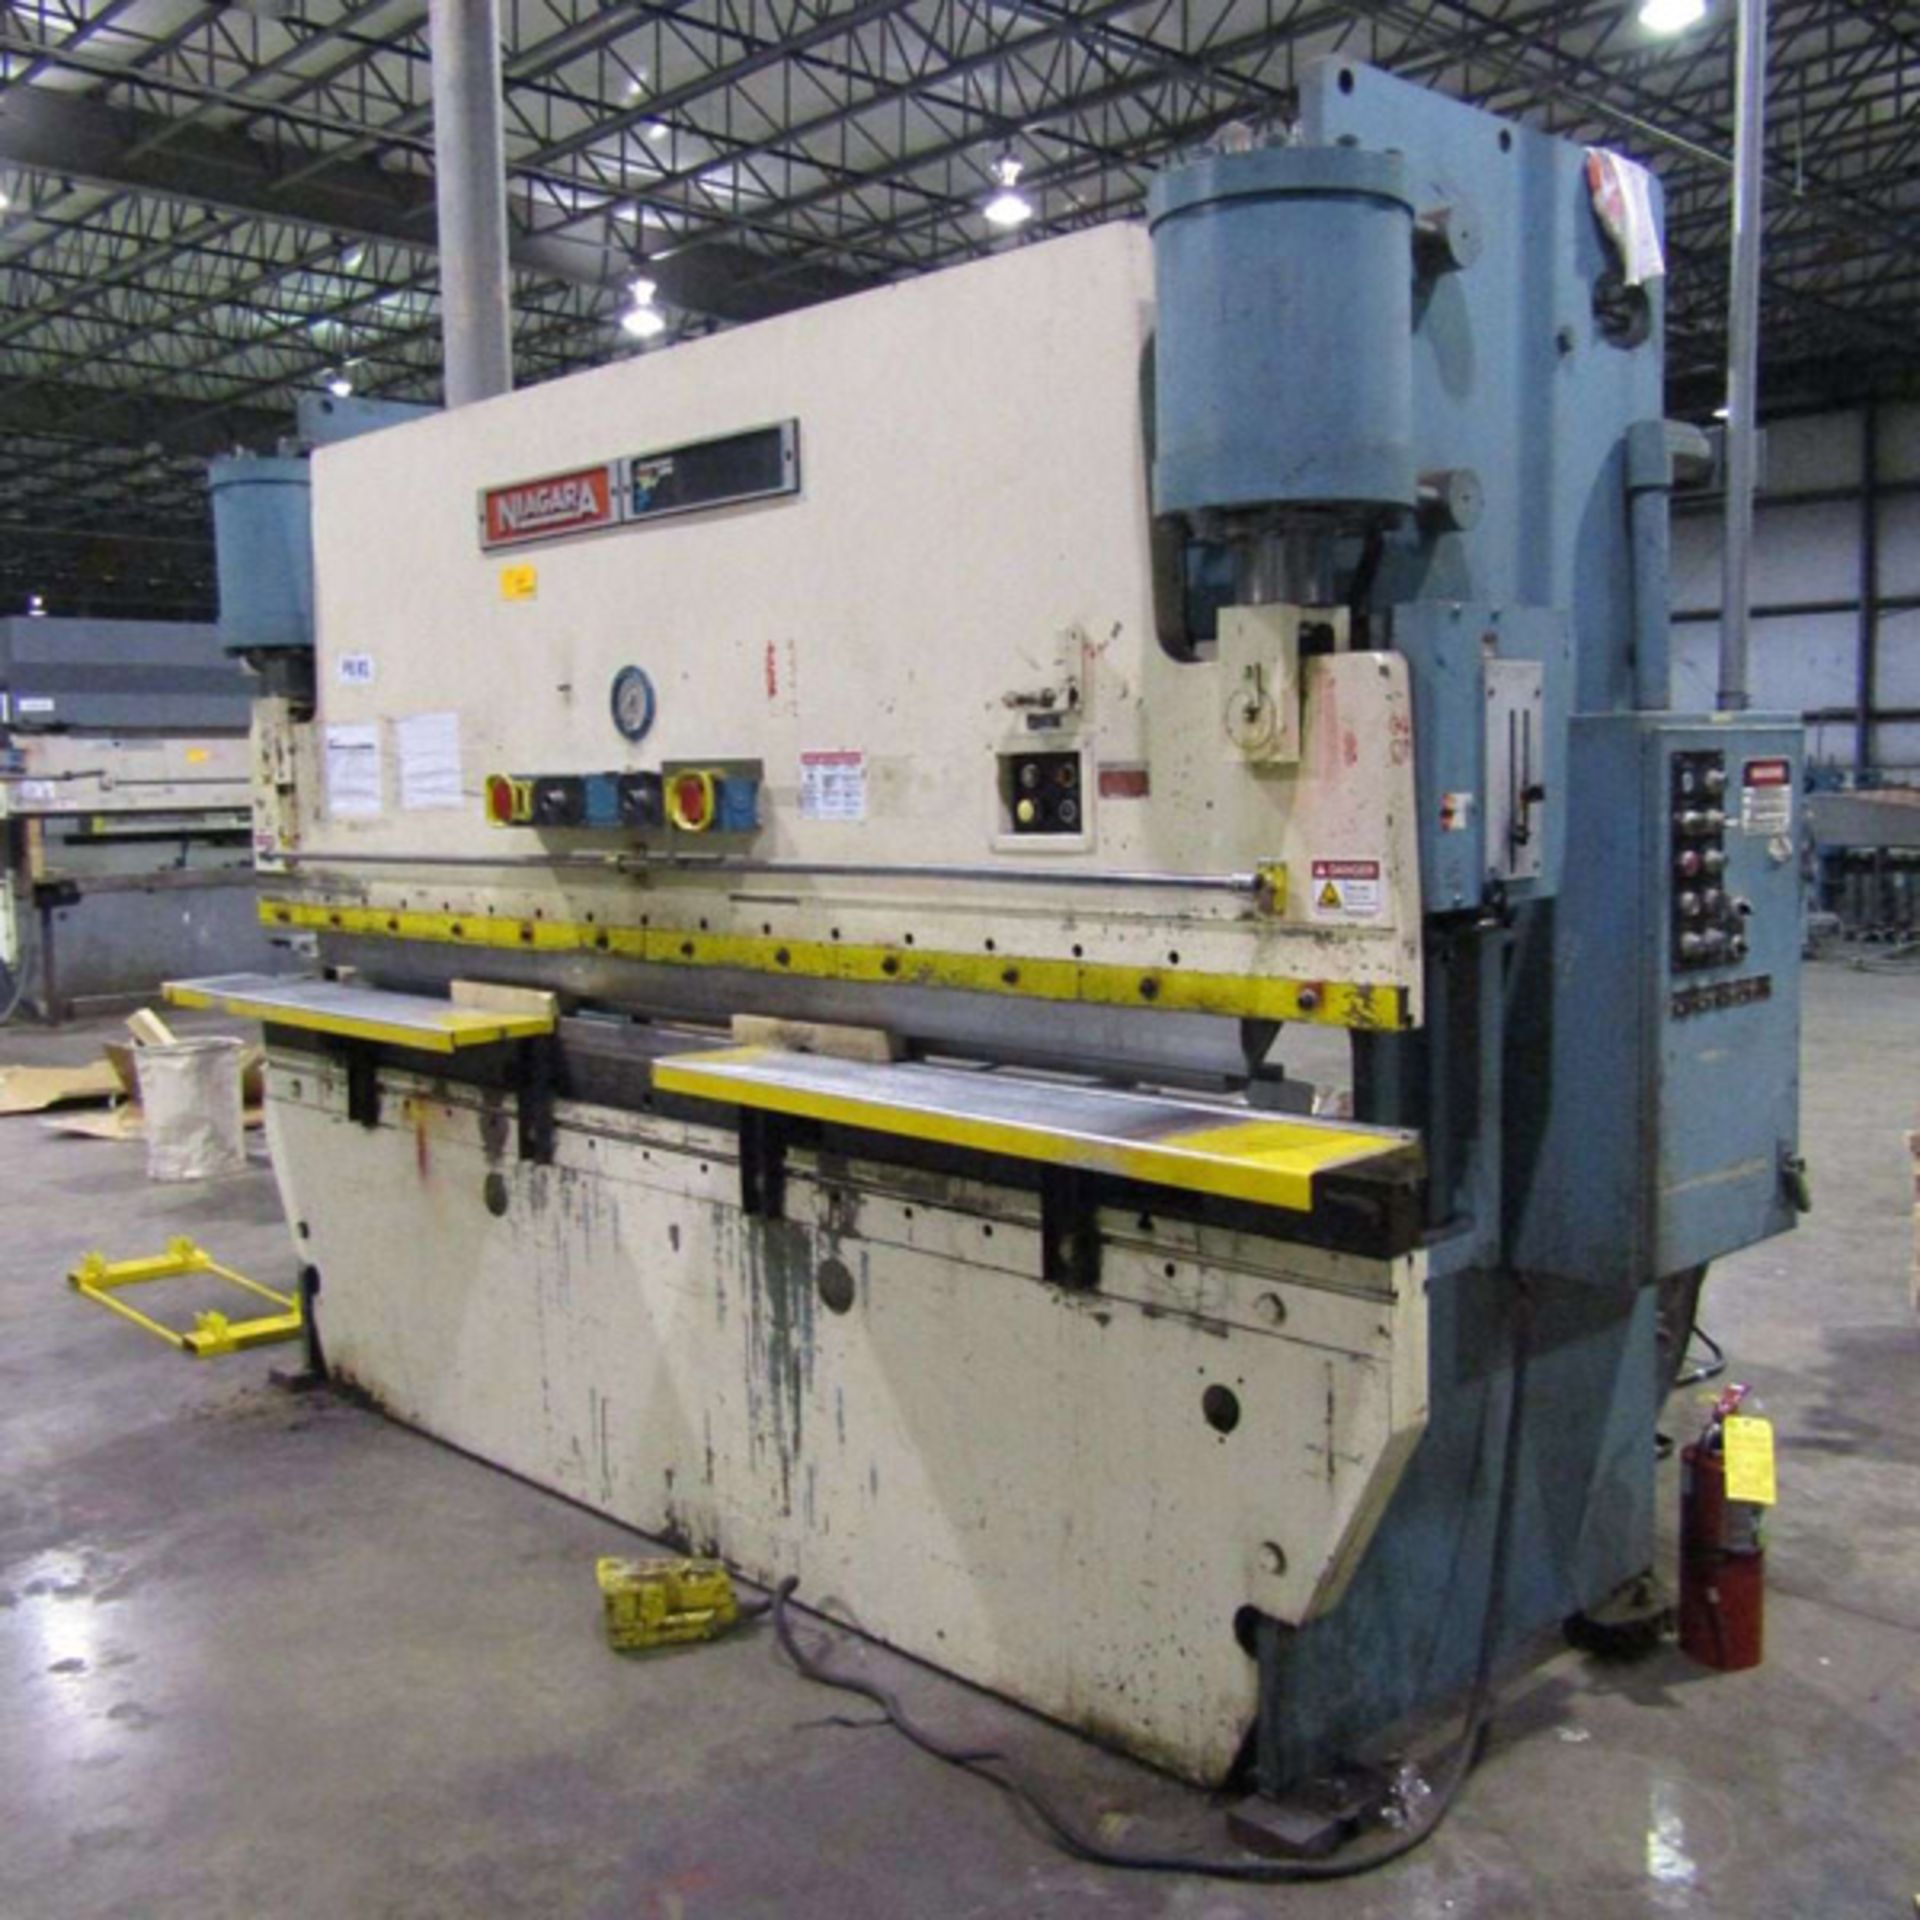 Niagara CNC Hyd. Press Brake, 135-Ton x 12' - Located In Painesville, OH - 8419 - Image 3 of 11